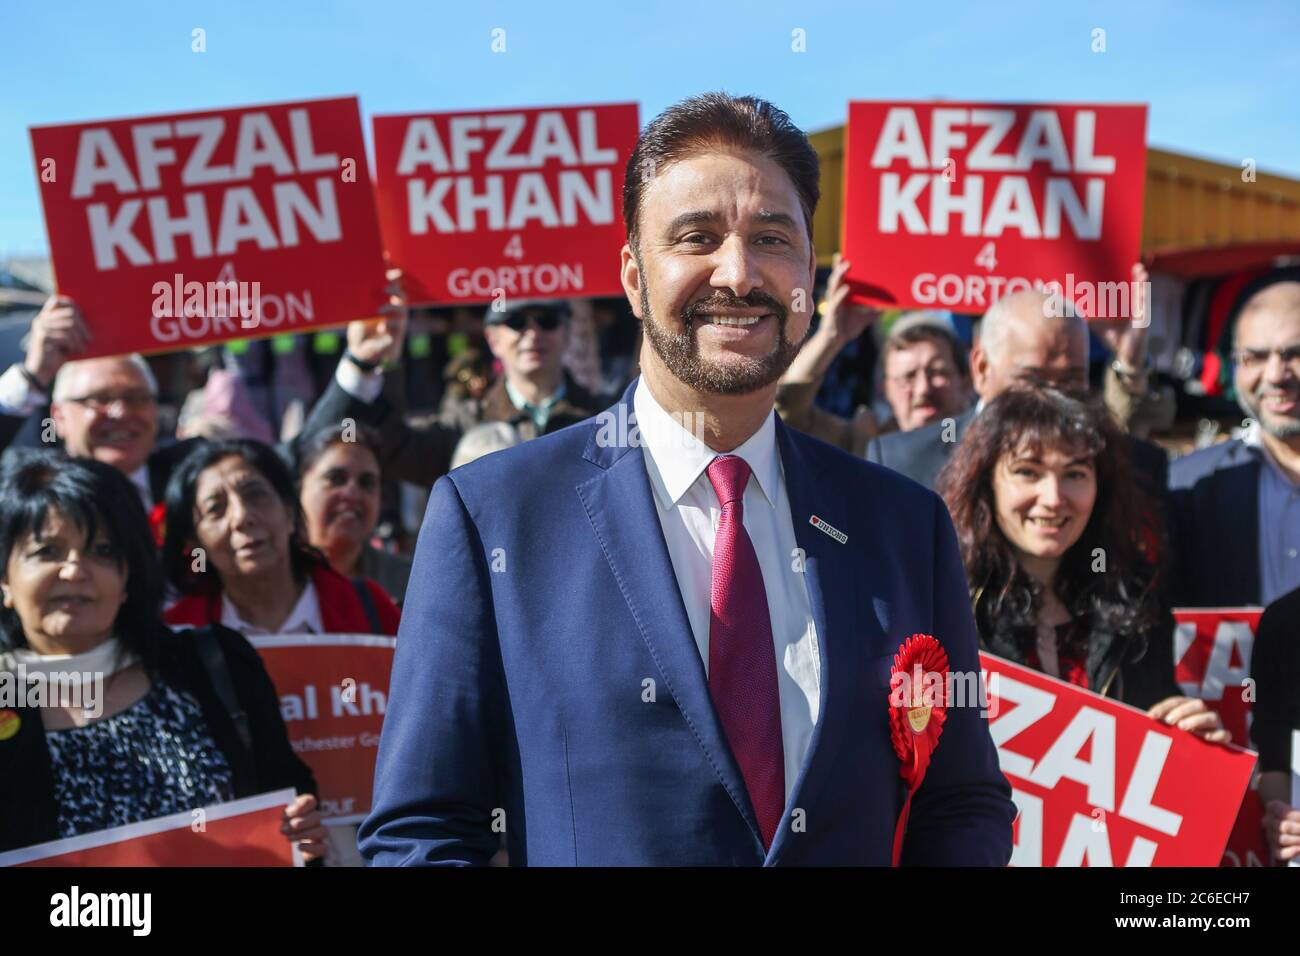 Afzal Khan, Labour's candidate in the Manchester Gorton by-election, launches his campaign at Longsight Market in Manchester. The by-election was trig Stock Photo